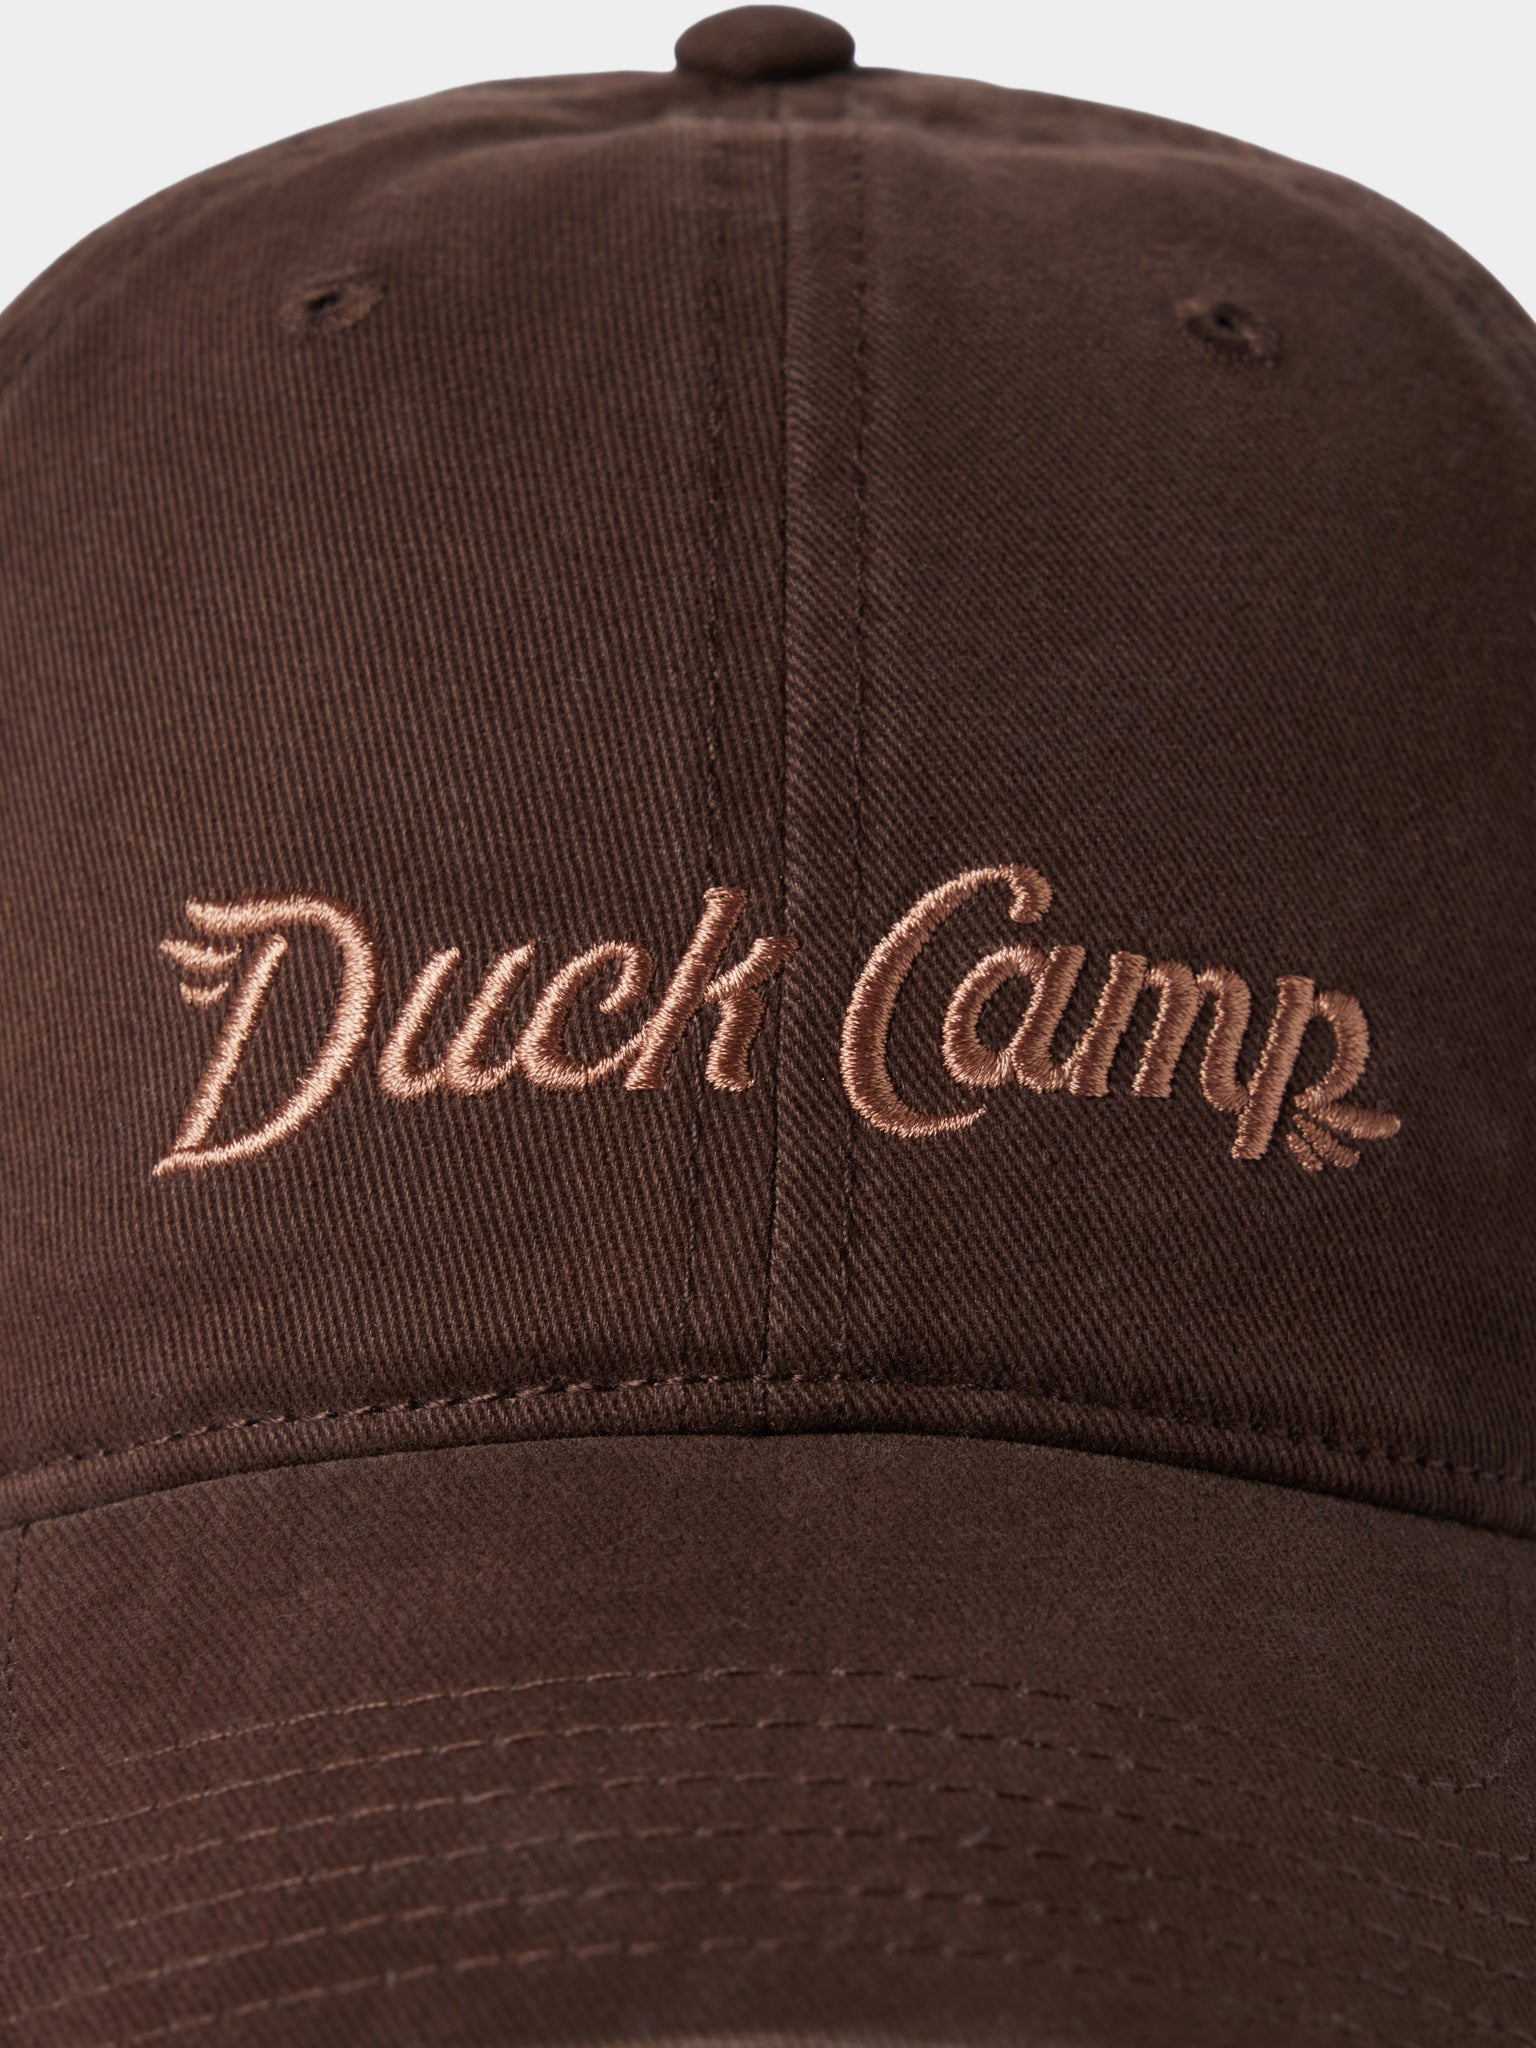 Trout Hat - Charcoal – Duck Camp